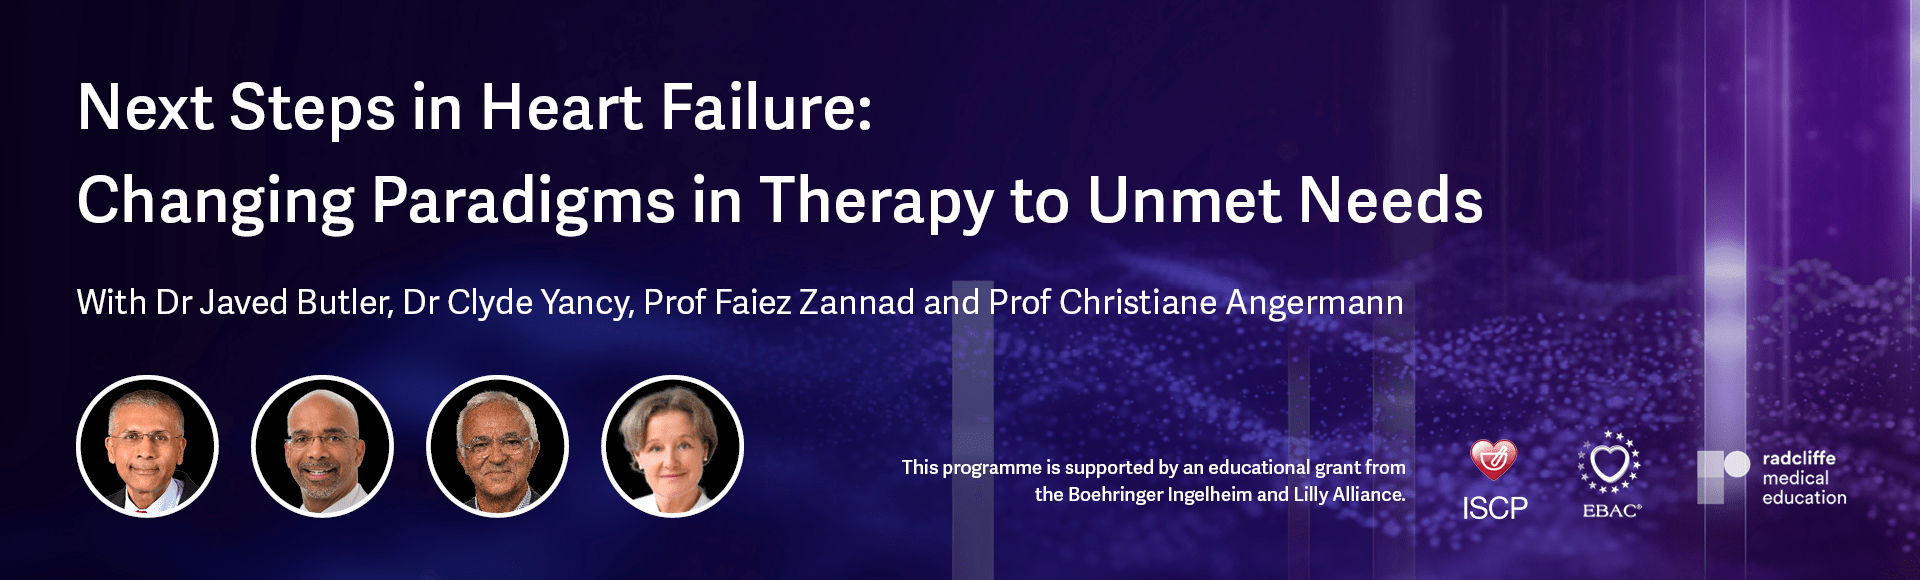 Next Steps in Heart Failure: Changing Paradigms in Therapy to Unmet Needs